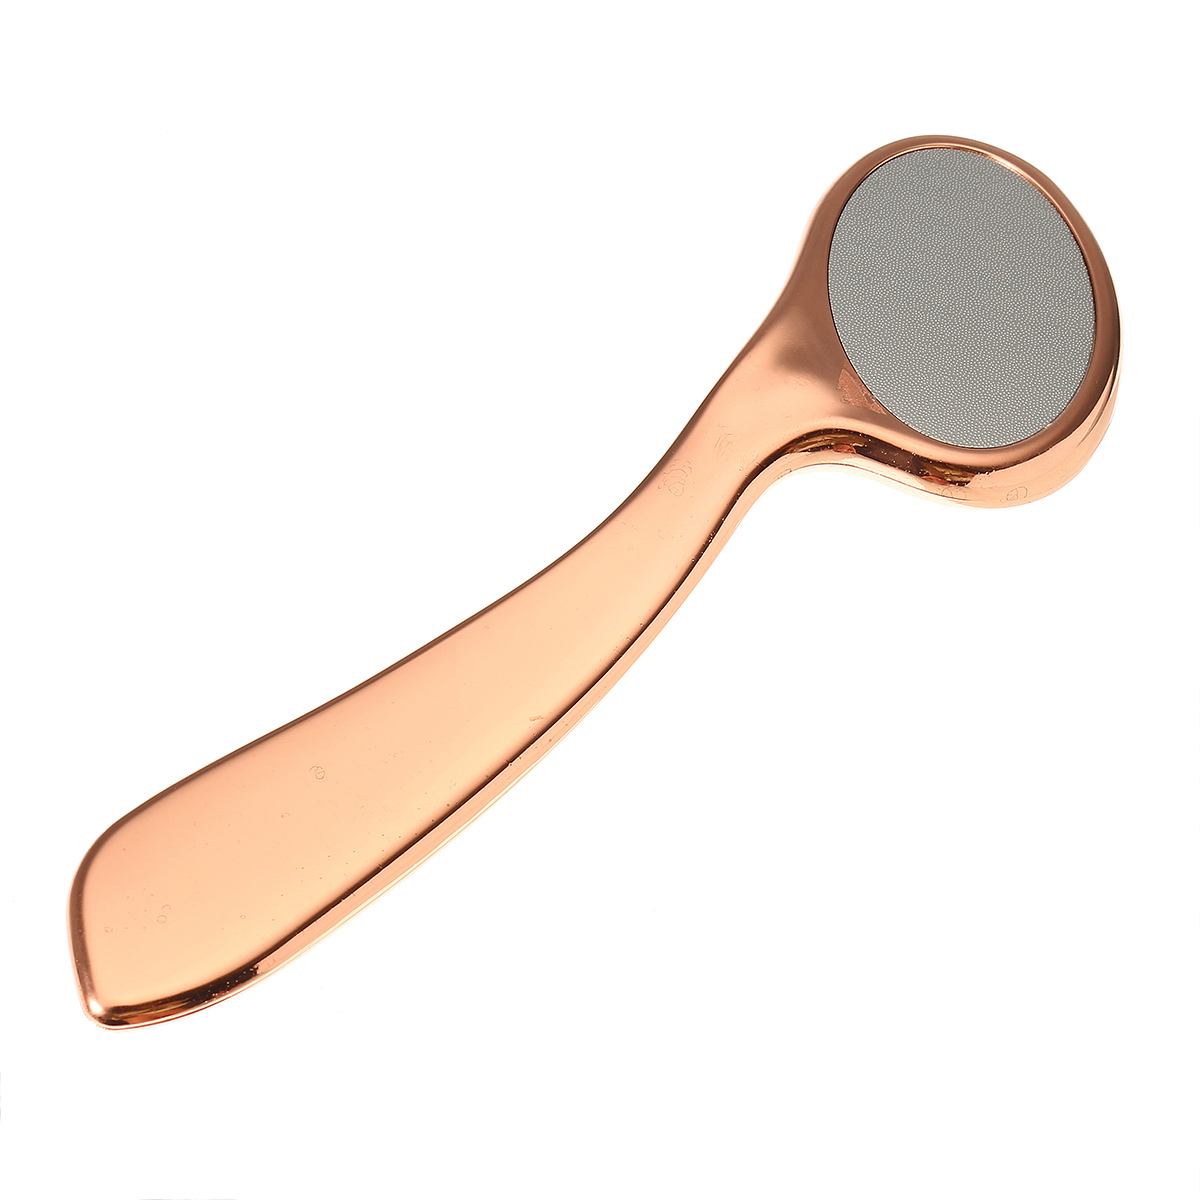 1pc-Dual-Sided-Rose-Gold-Foot-Rasp-Dead-Skin-Remover-Exfoliating-Tool-Pedicure-Grinding-Rubbing-1191589